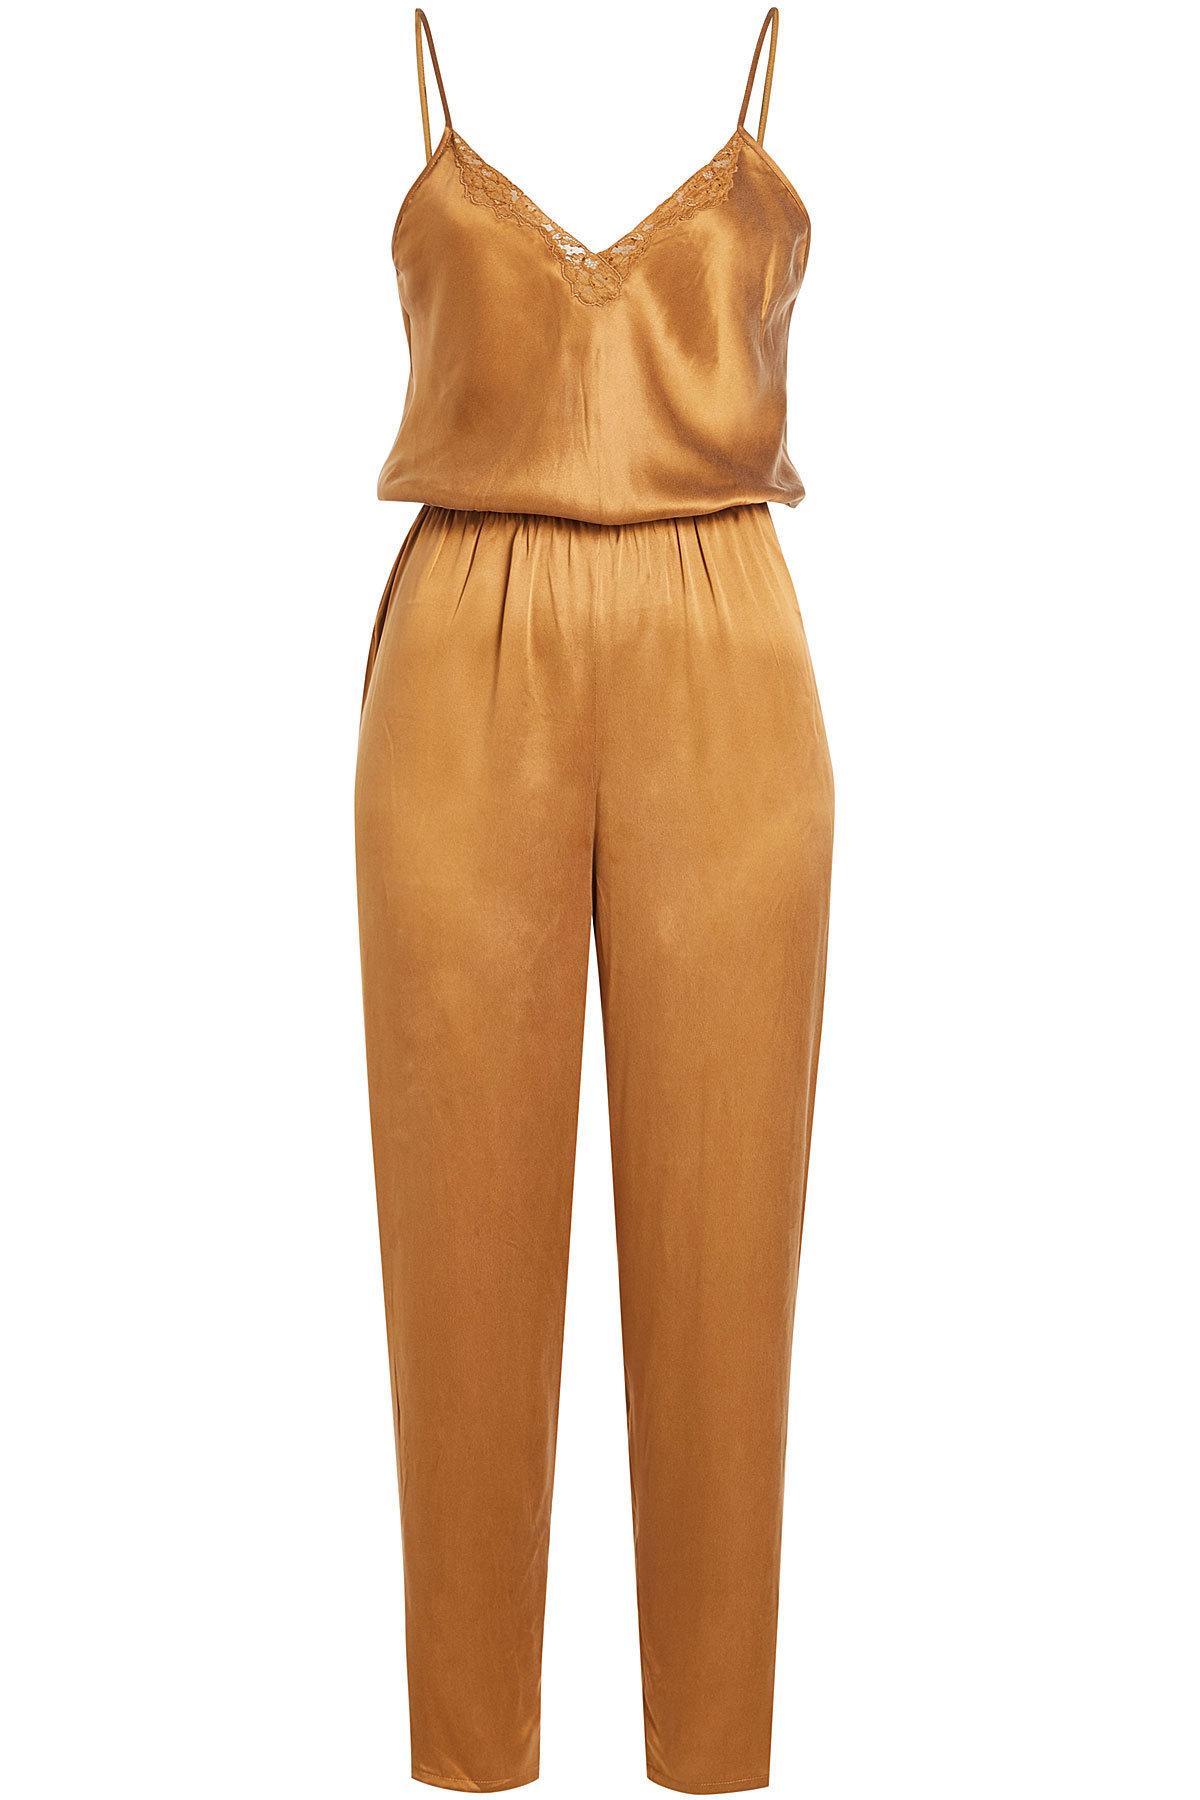 Mes Demoiselles Skittle Silk Jumpsuit With Lace In Beige | ModeSens